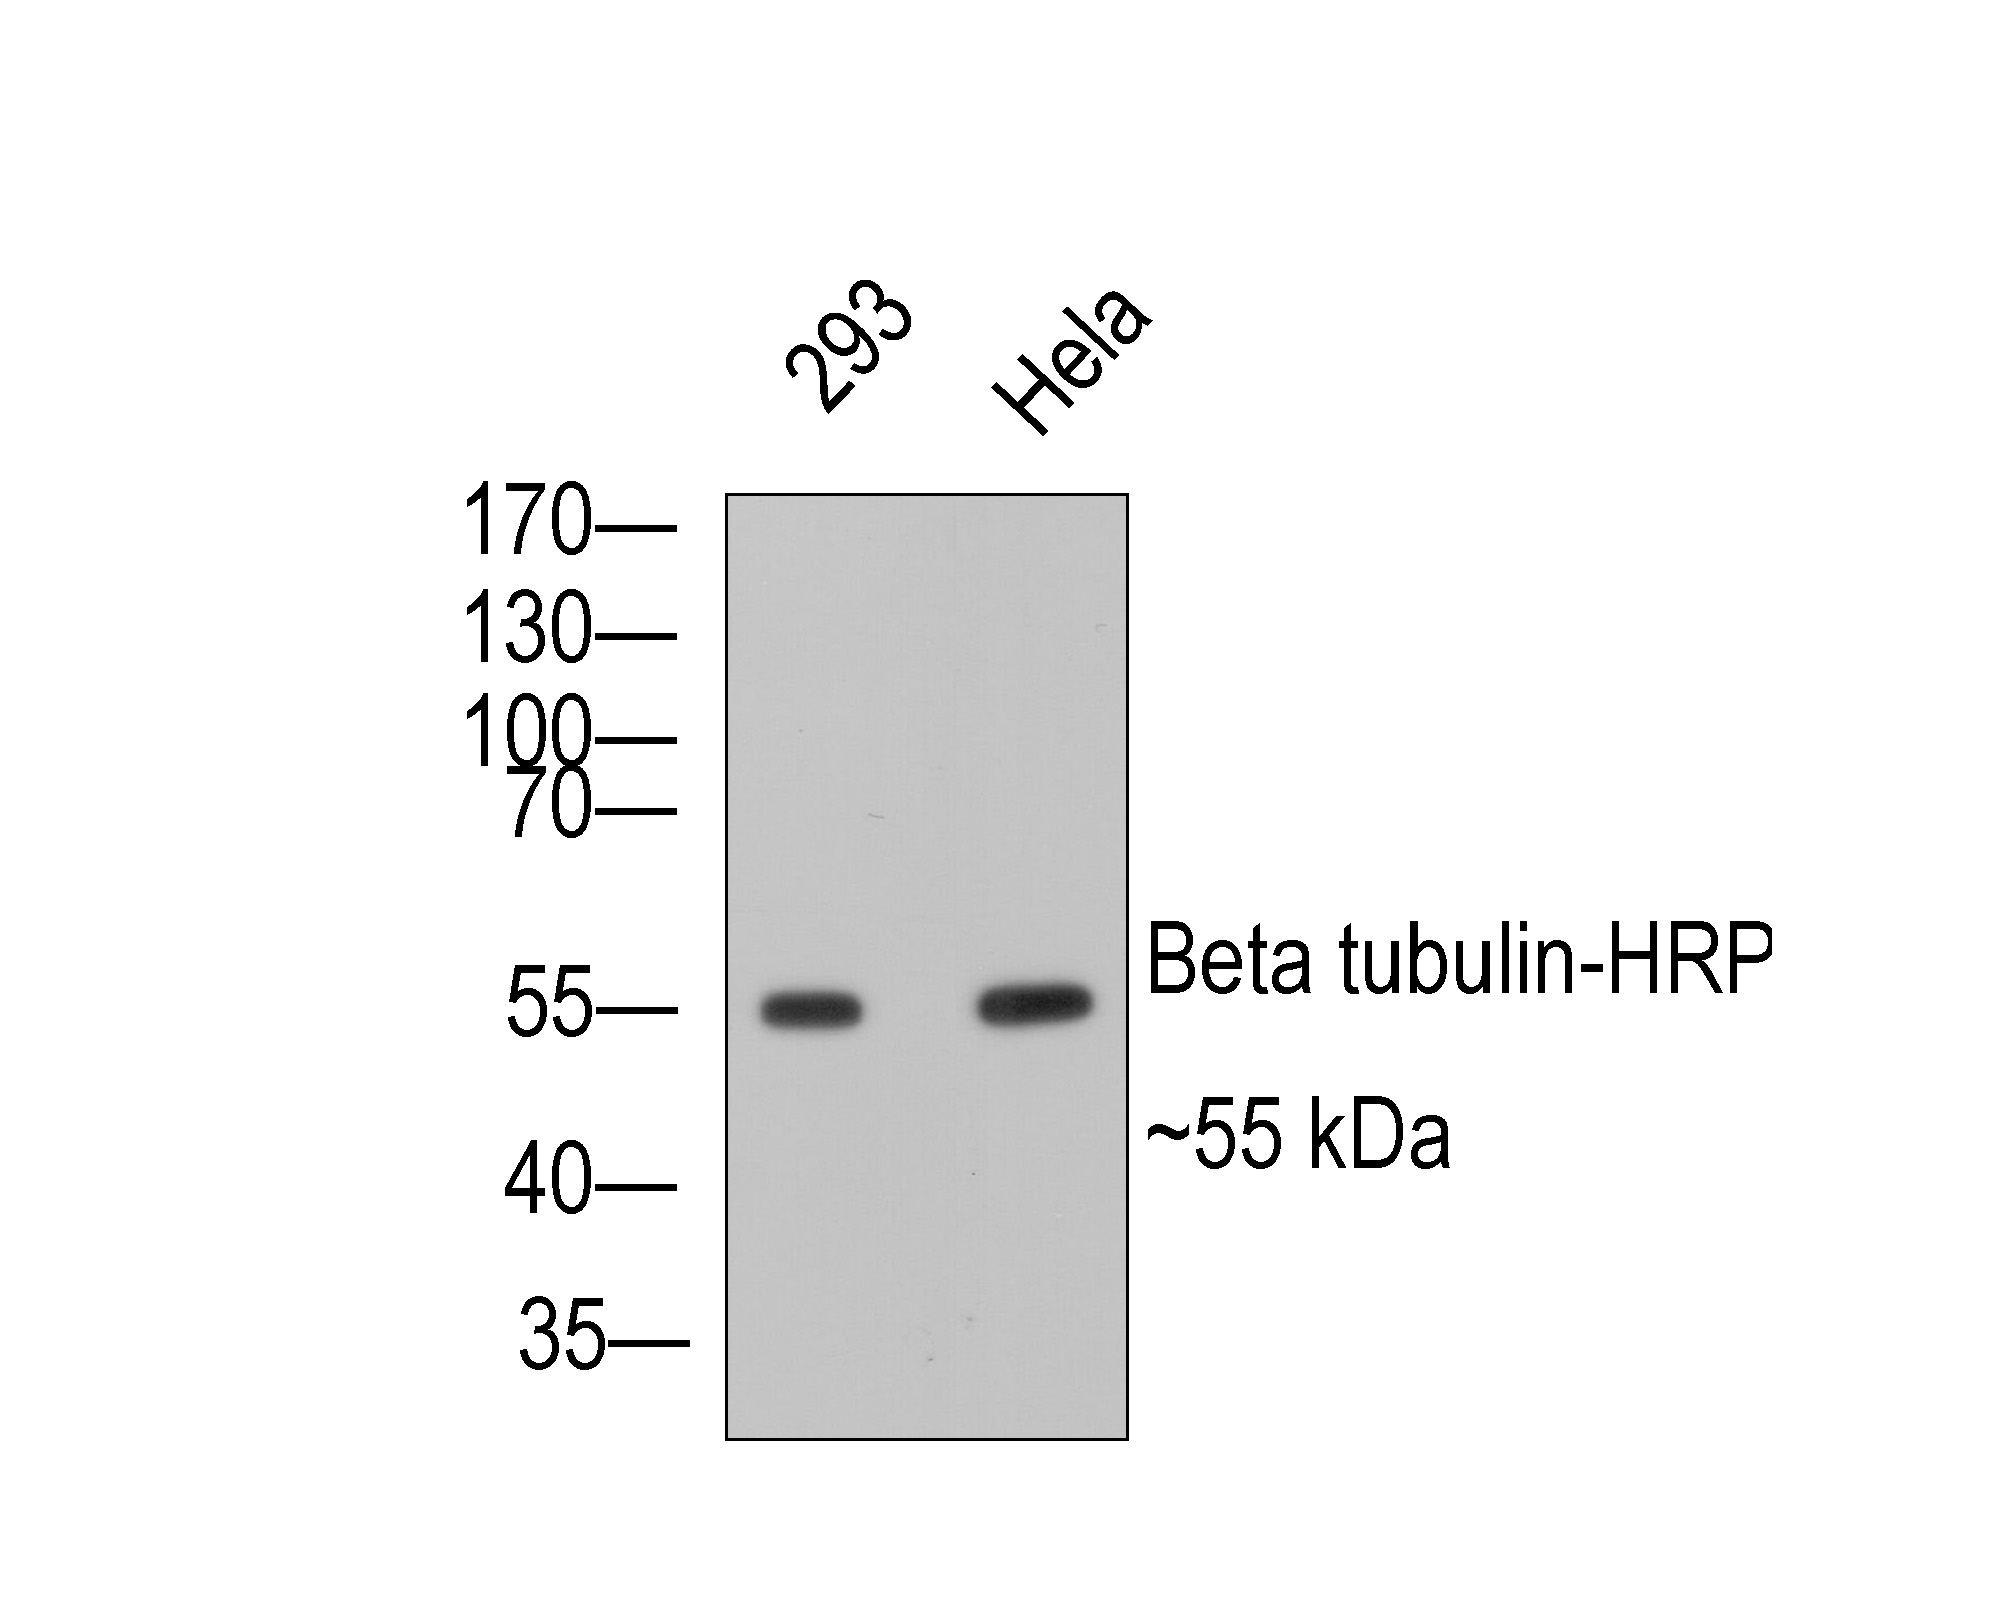 Immunohistochemical analysis of paraffin-embedded mouse fallopian tube tissue using anti-beta Tubulin-HRP in antibody. Counter stained with hematoxylin.